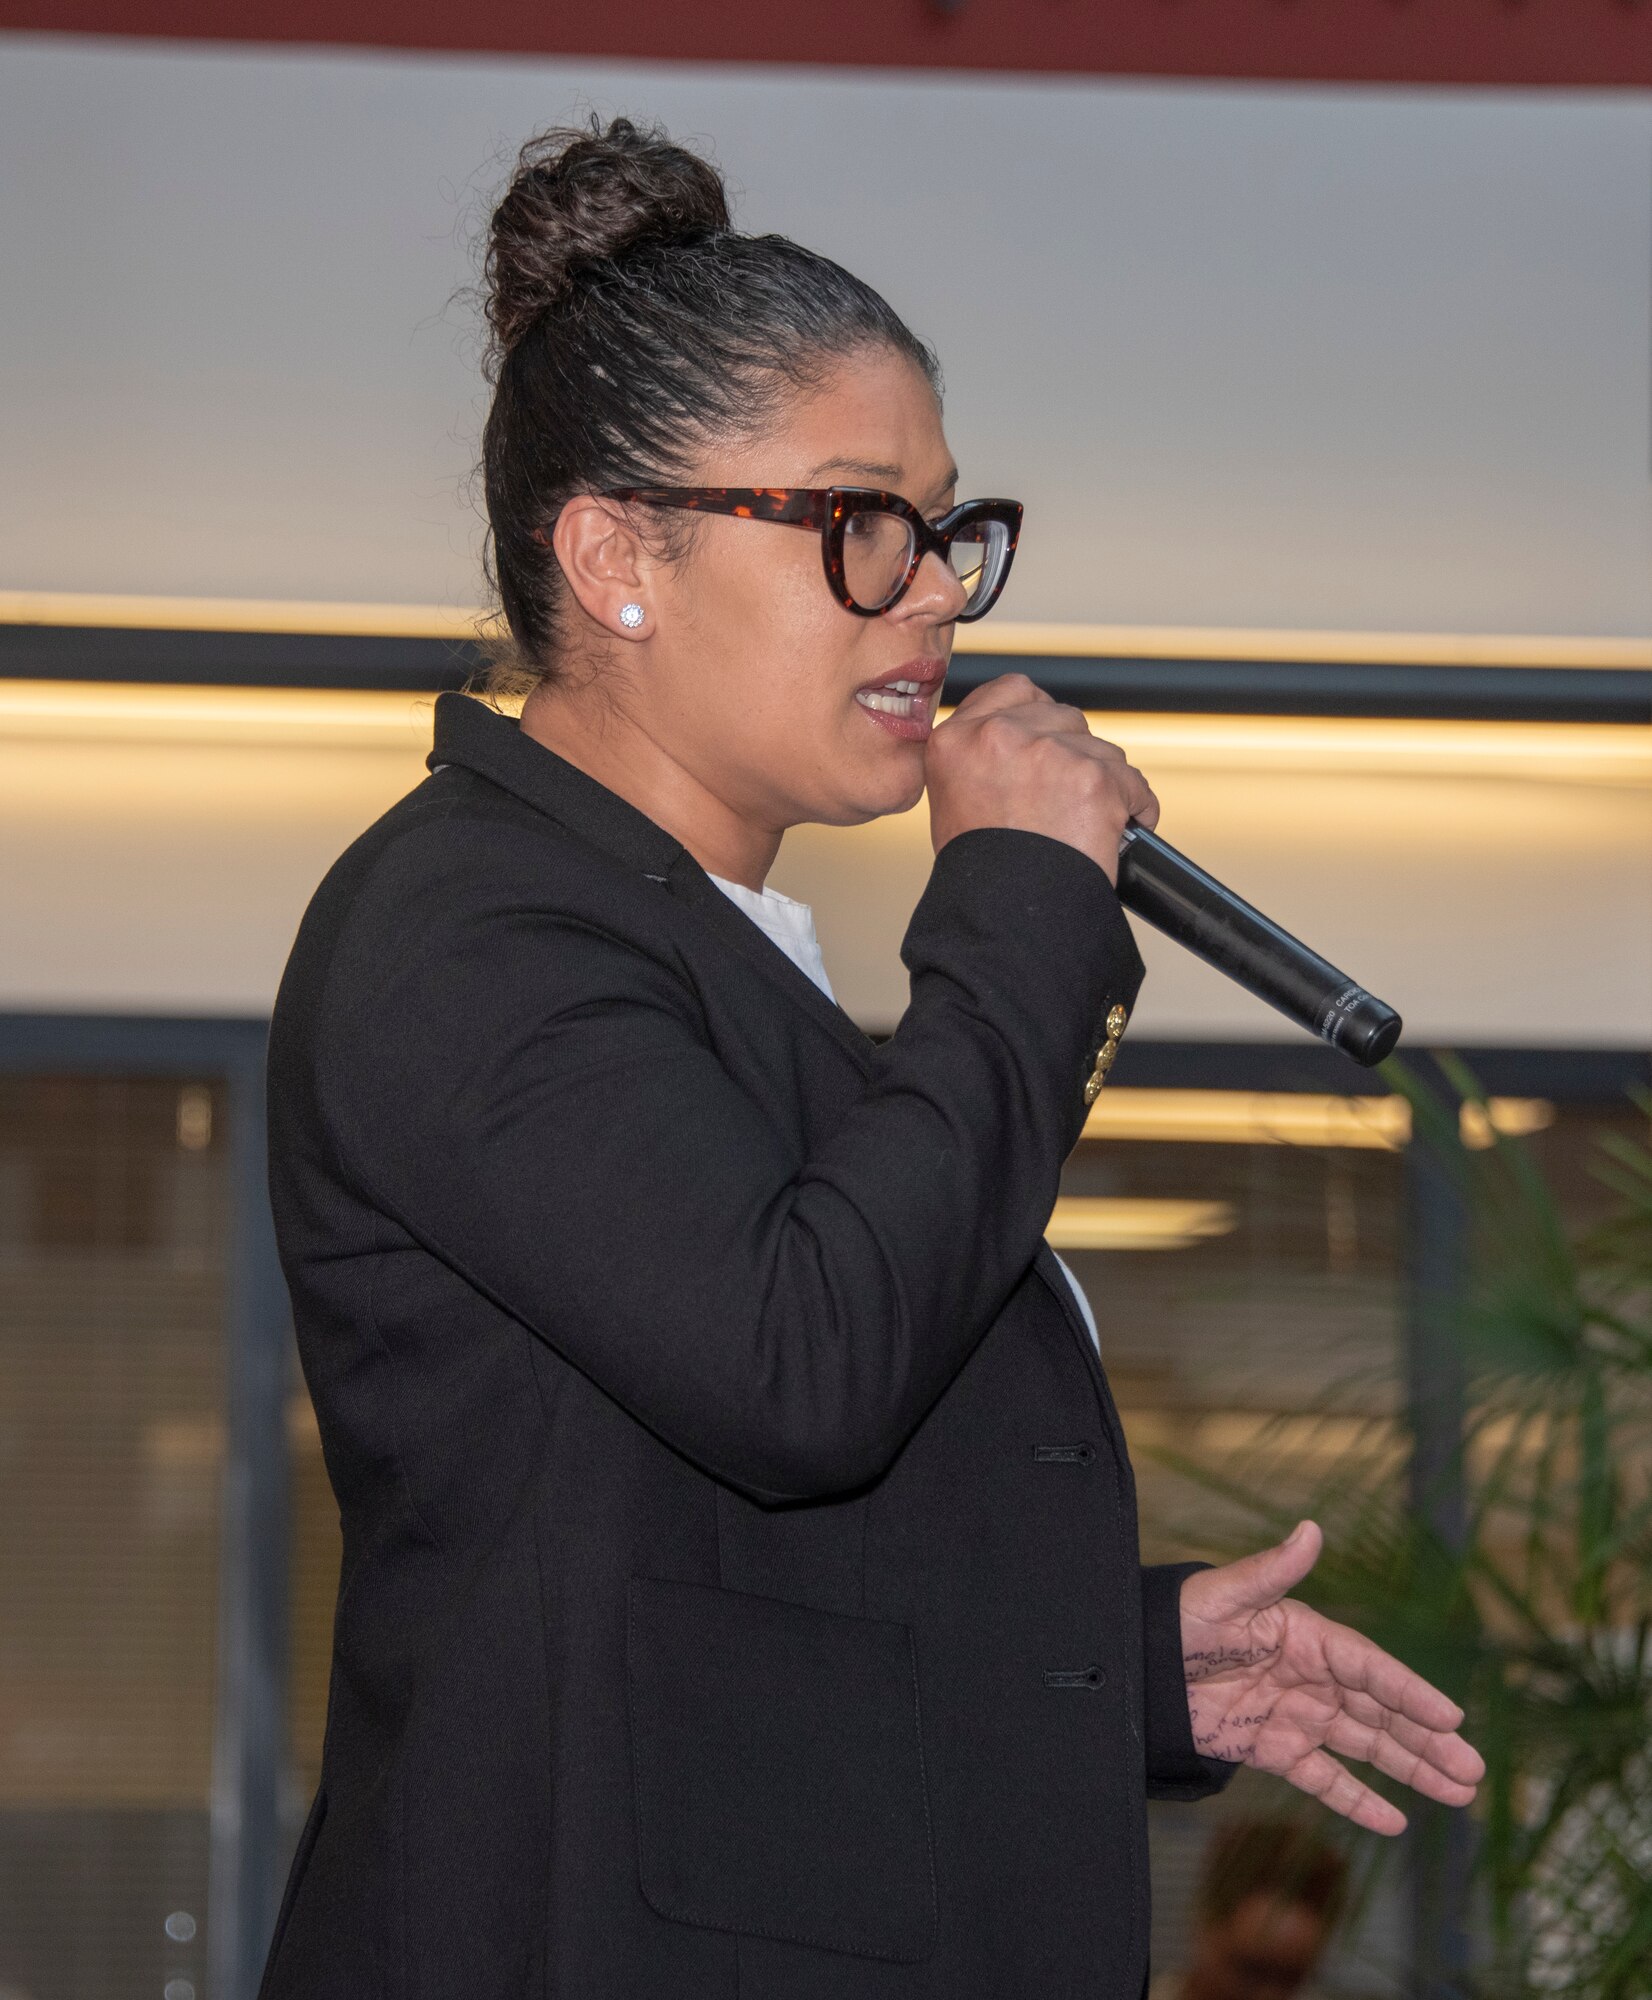 U.S. Air Force Master Sgt. Sophia Rodriguez, 144th Fighter Wing, delivers remarks during the Women’s History Month social gathering, March 20, 2019, at Travis Air Force Base, California. Since 1987, the month of March has been designated to celebrate the historical and ongoing achievements and contributions of women. Members of the Women Inspiring the Next Generation’s Success committee were responsible for organizing the event which included an exhibit highlighting extraordinary female heroes and featured speakers prominent in the Travis community. (U.S. Air Force photo by Heide Couch)